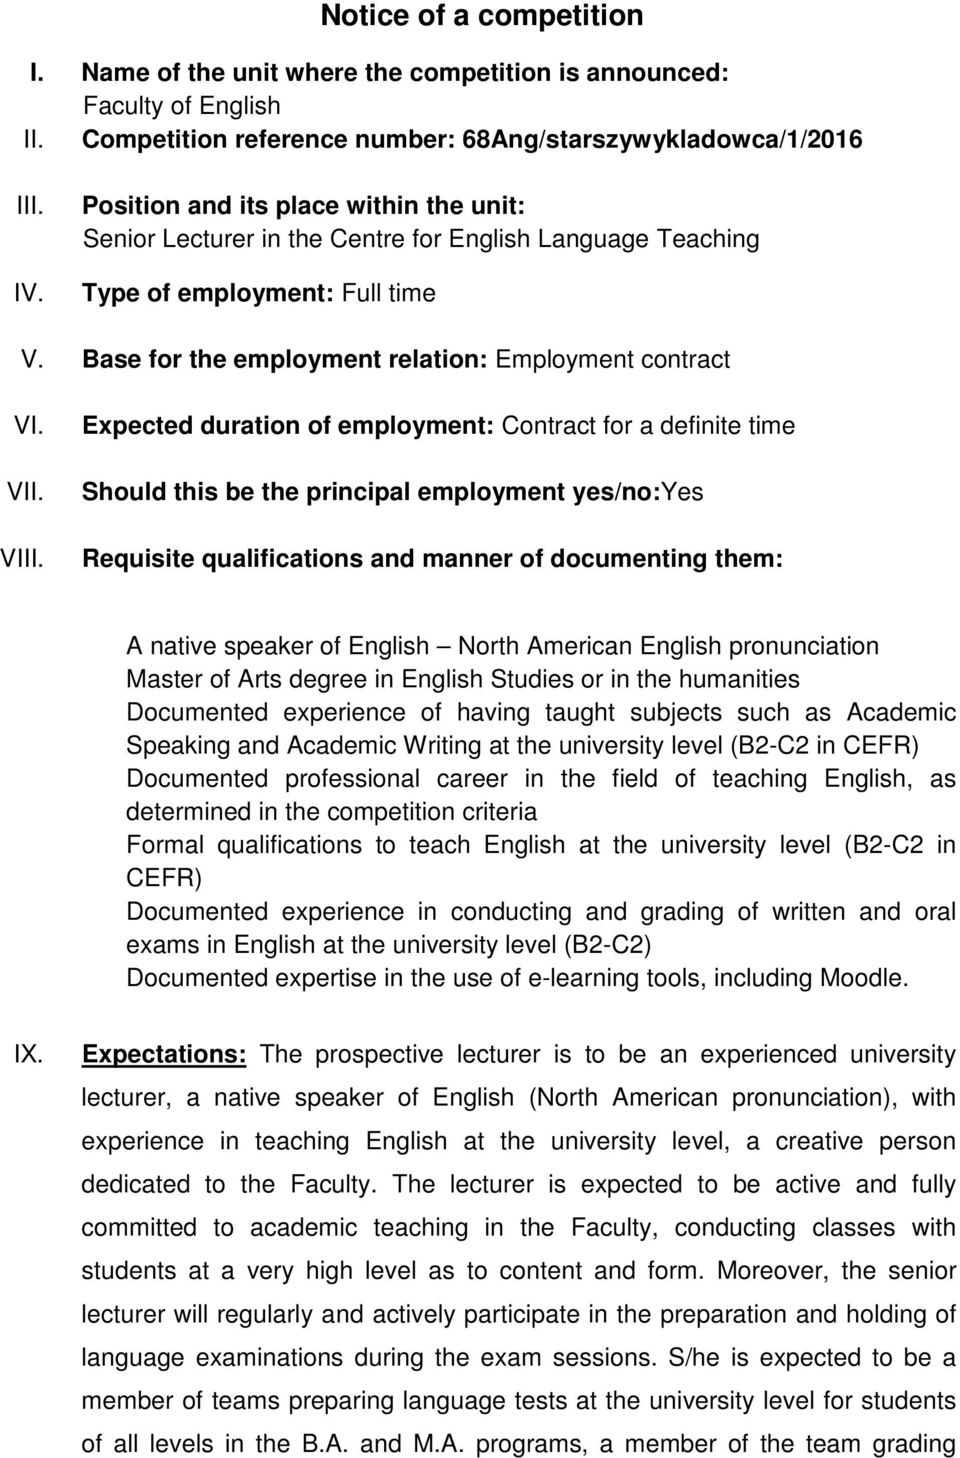 VIII. Expected duration of employment: Contract for a definite time Should this be the principal employment yes/no:yes Requisite qualifications and manner of documenting them: A native speaker of